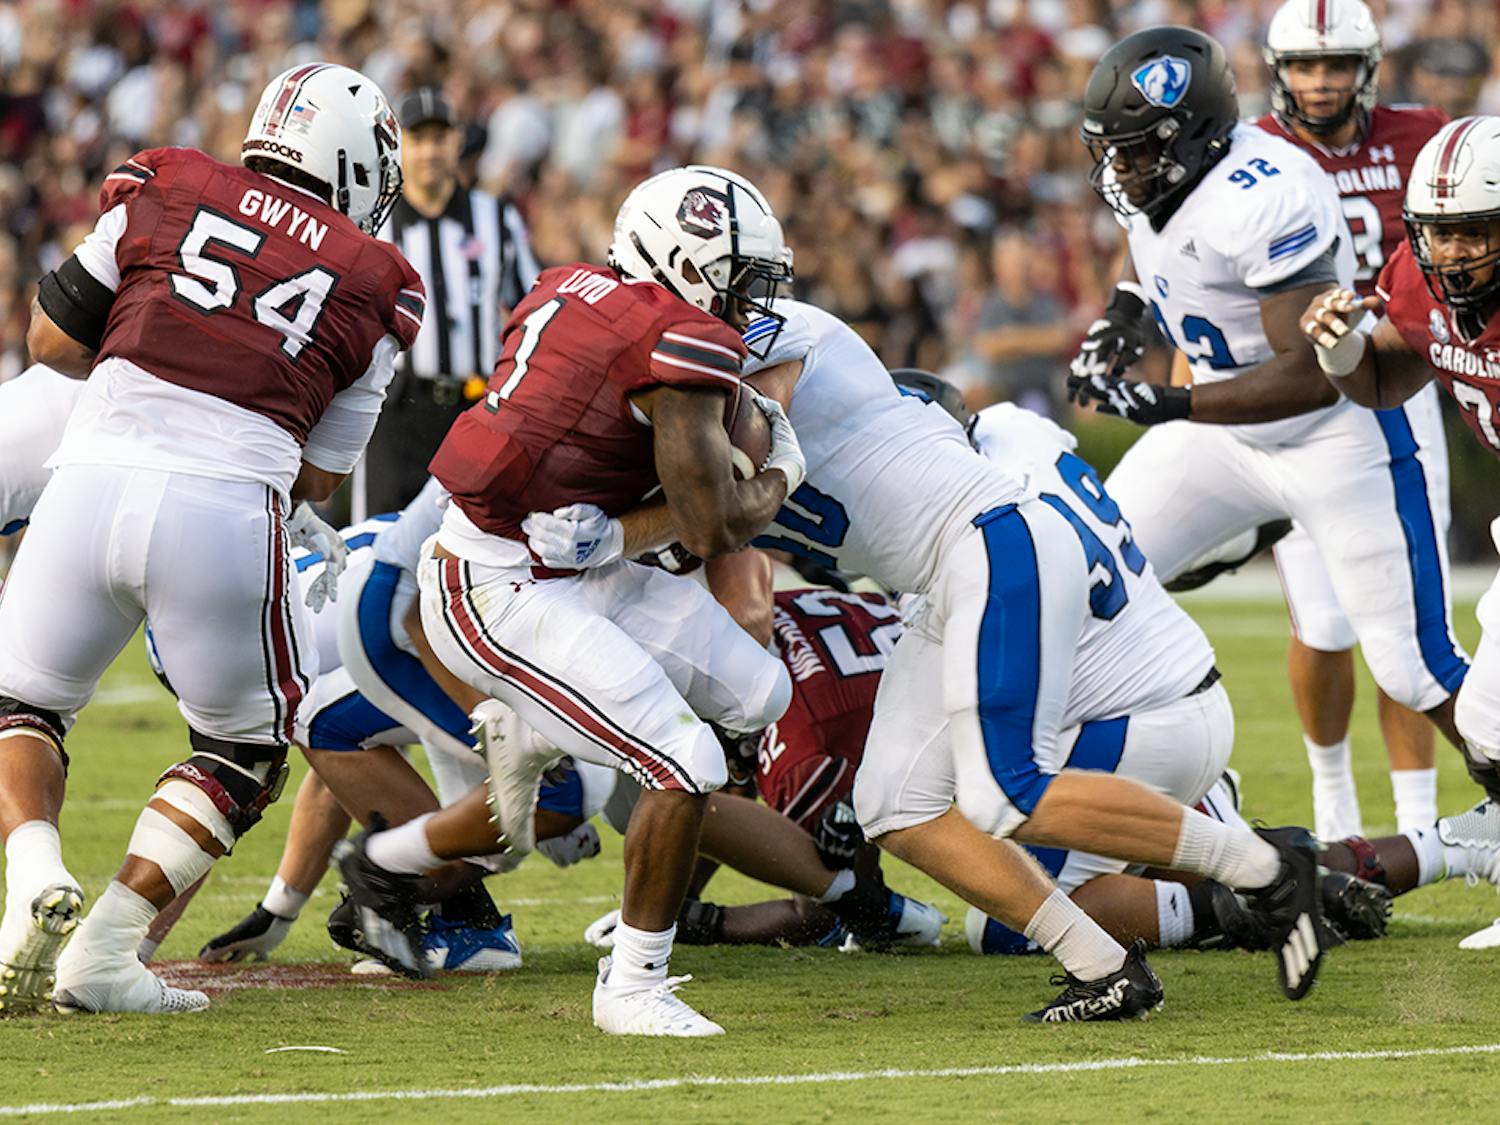 Redshirt freshman running back Marshawn Lloyd breaks free from an Eastern Illinois player on Sept. 4, 2021. Lloyd would go on to make a first down for the Gamecocks.